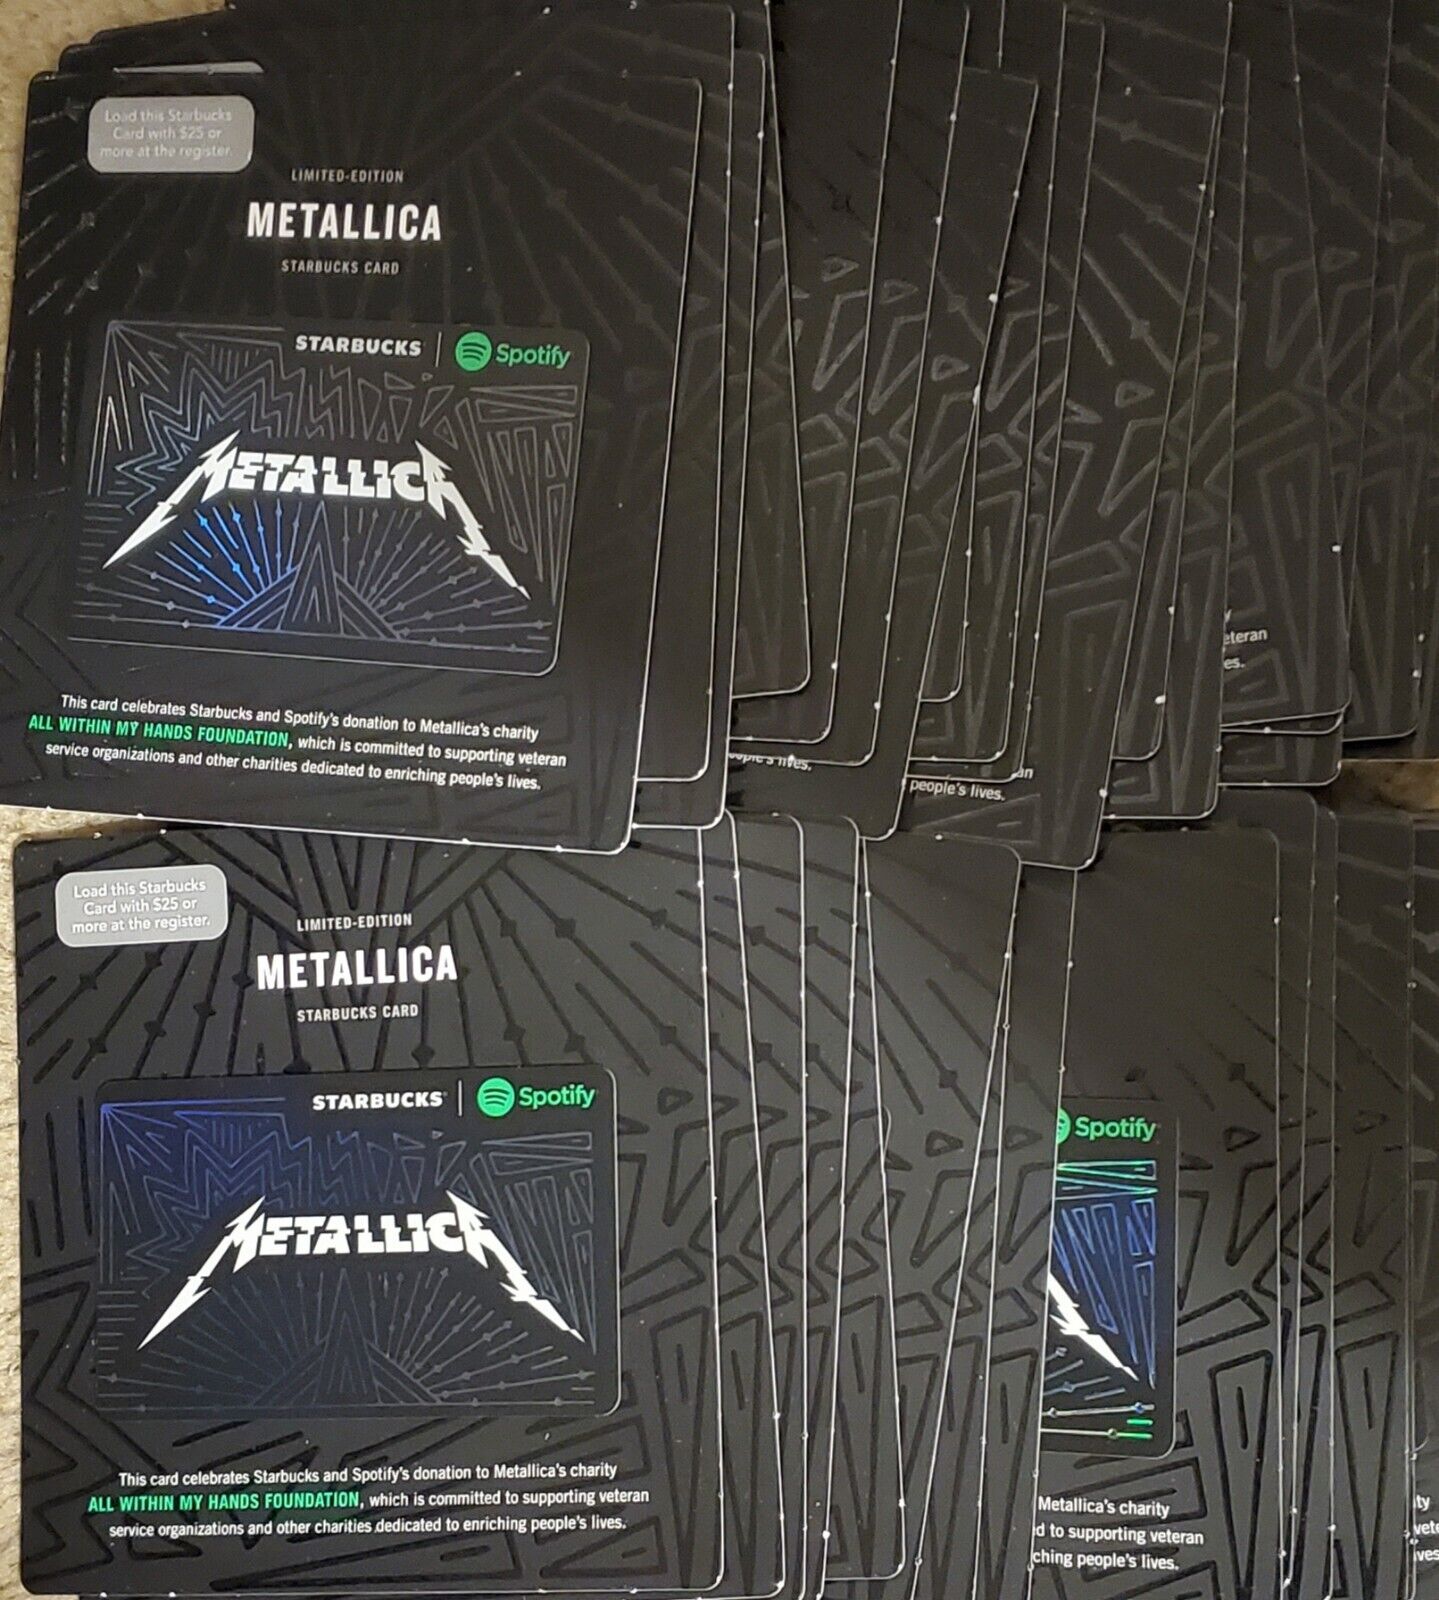 LOT Of  20 (Twenty) Metallica STARBUCKS Gift Cards Limited Edition Gift Card